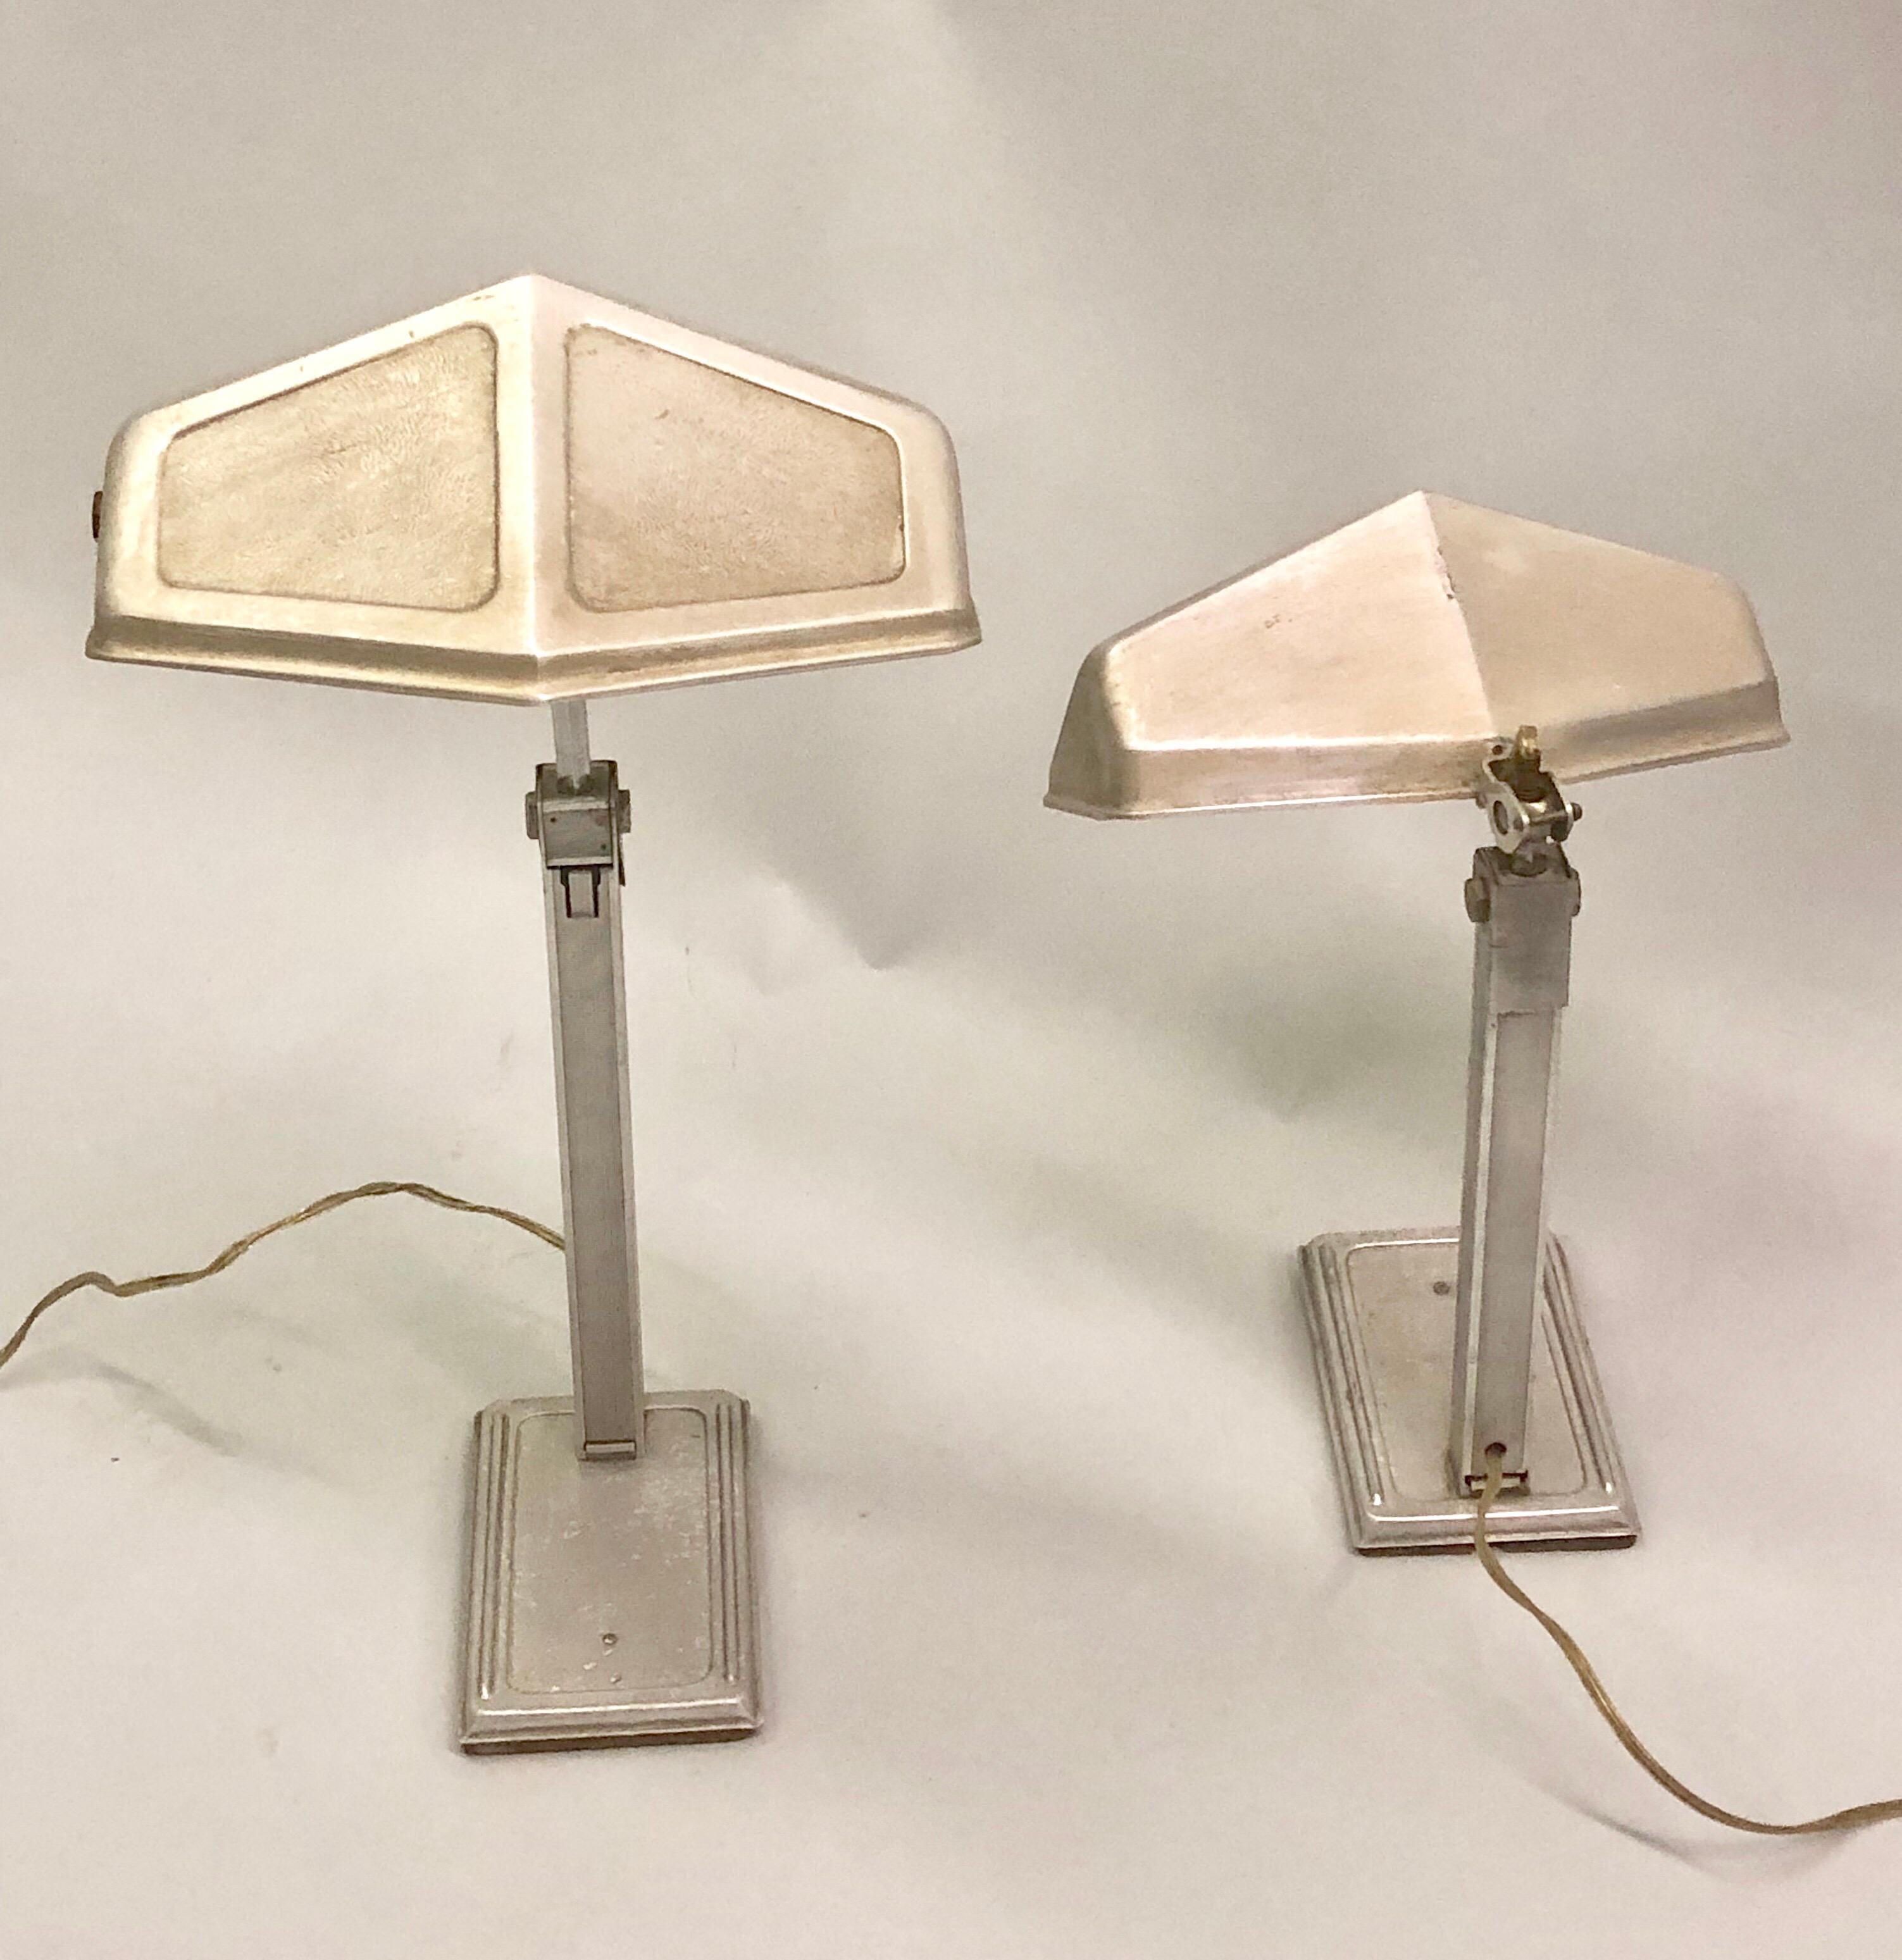 Two French early modern desk or table lamps in aluminum with movable and adjustable diffusers by Pirette. 

The pieces show the influence of Modern, Industrial and French Art Deco Design. The diffusers orient up and down and to each side allowing